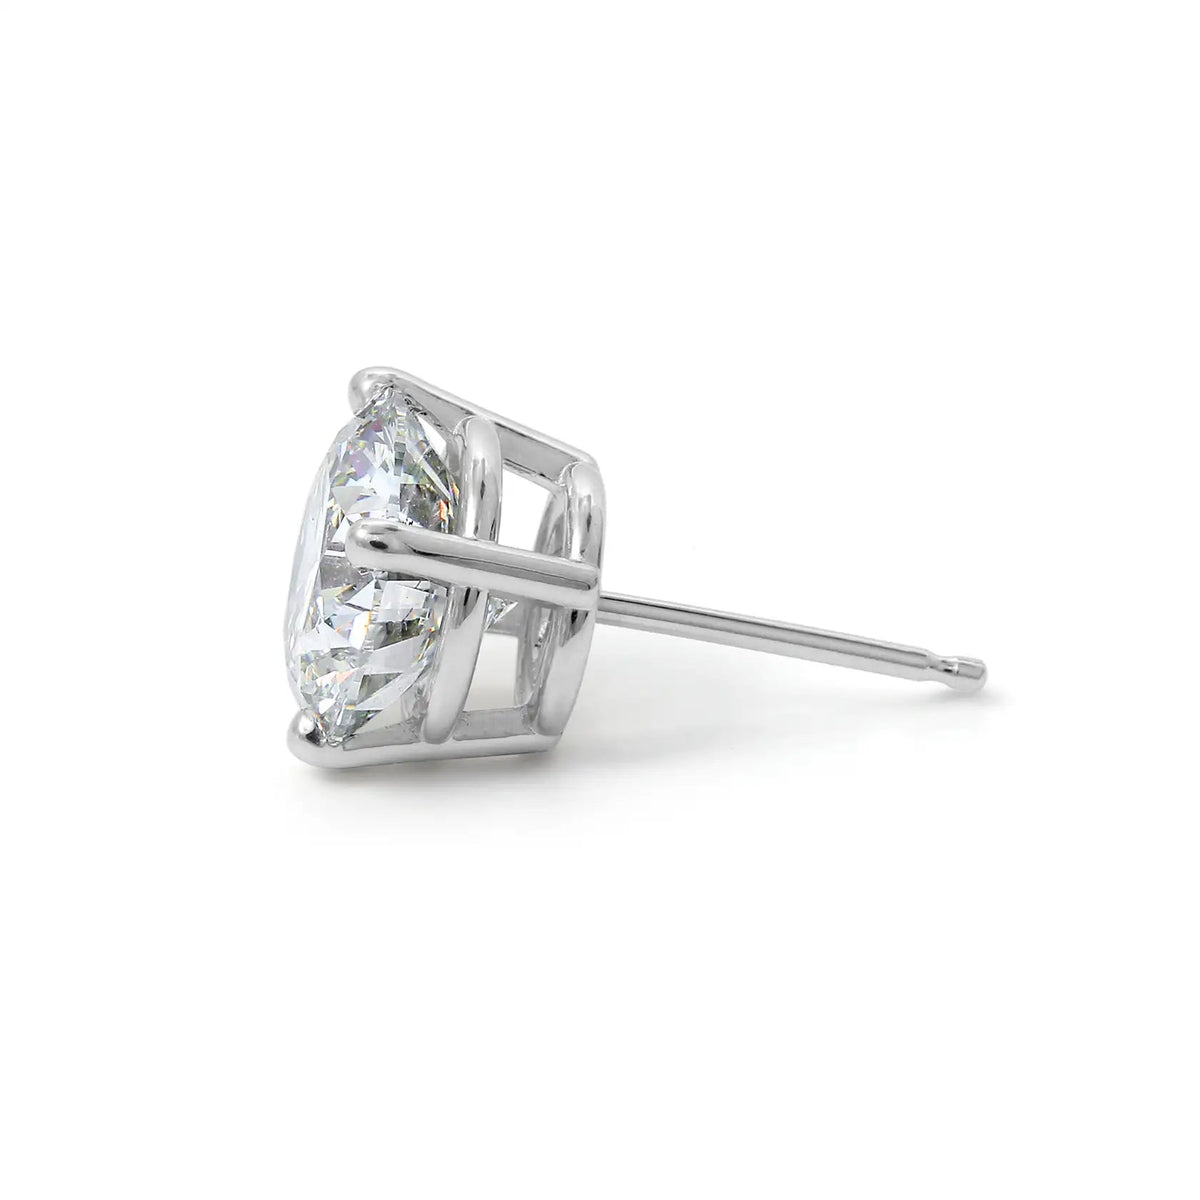 18ct 4 Claw White Gold Certified Diamond Stud Earrings 1.01ct